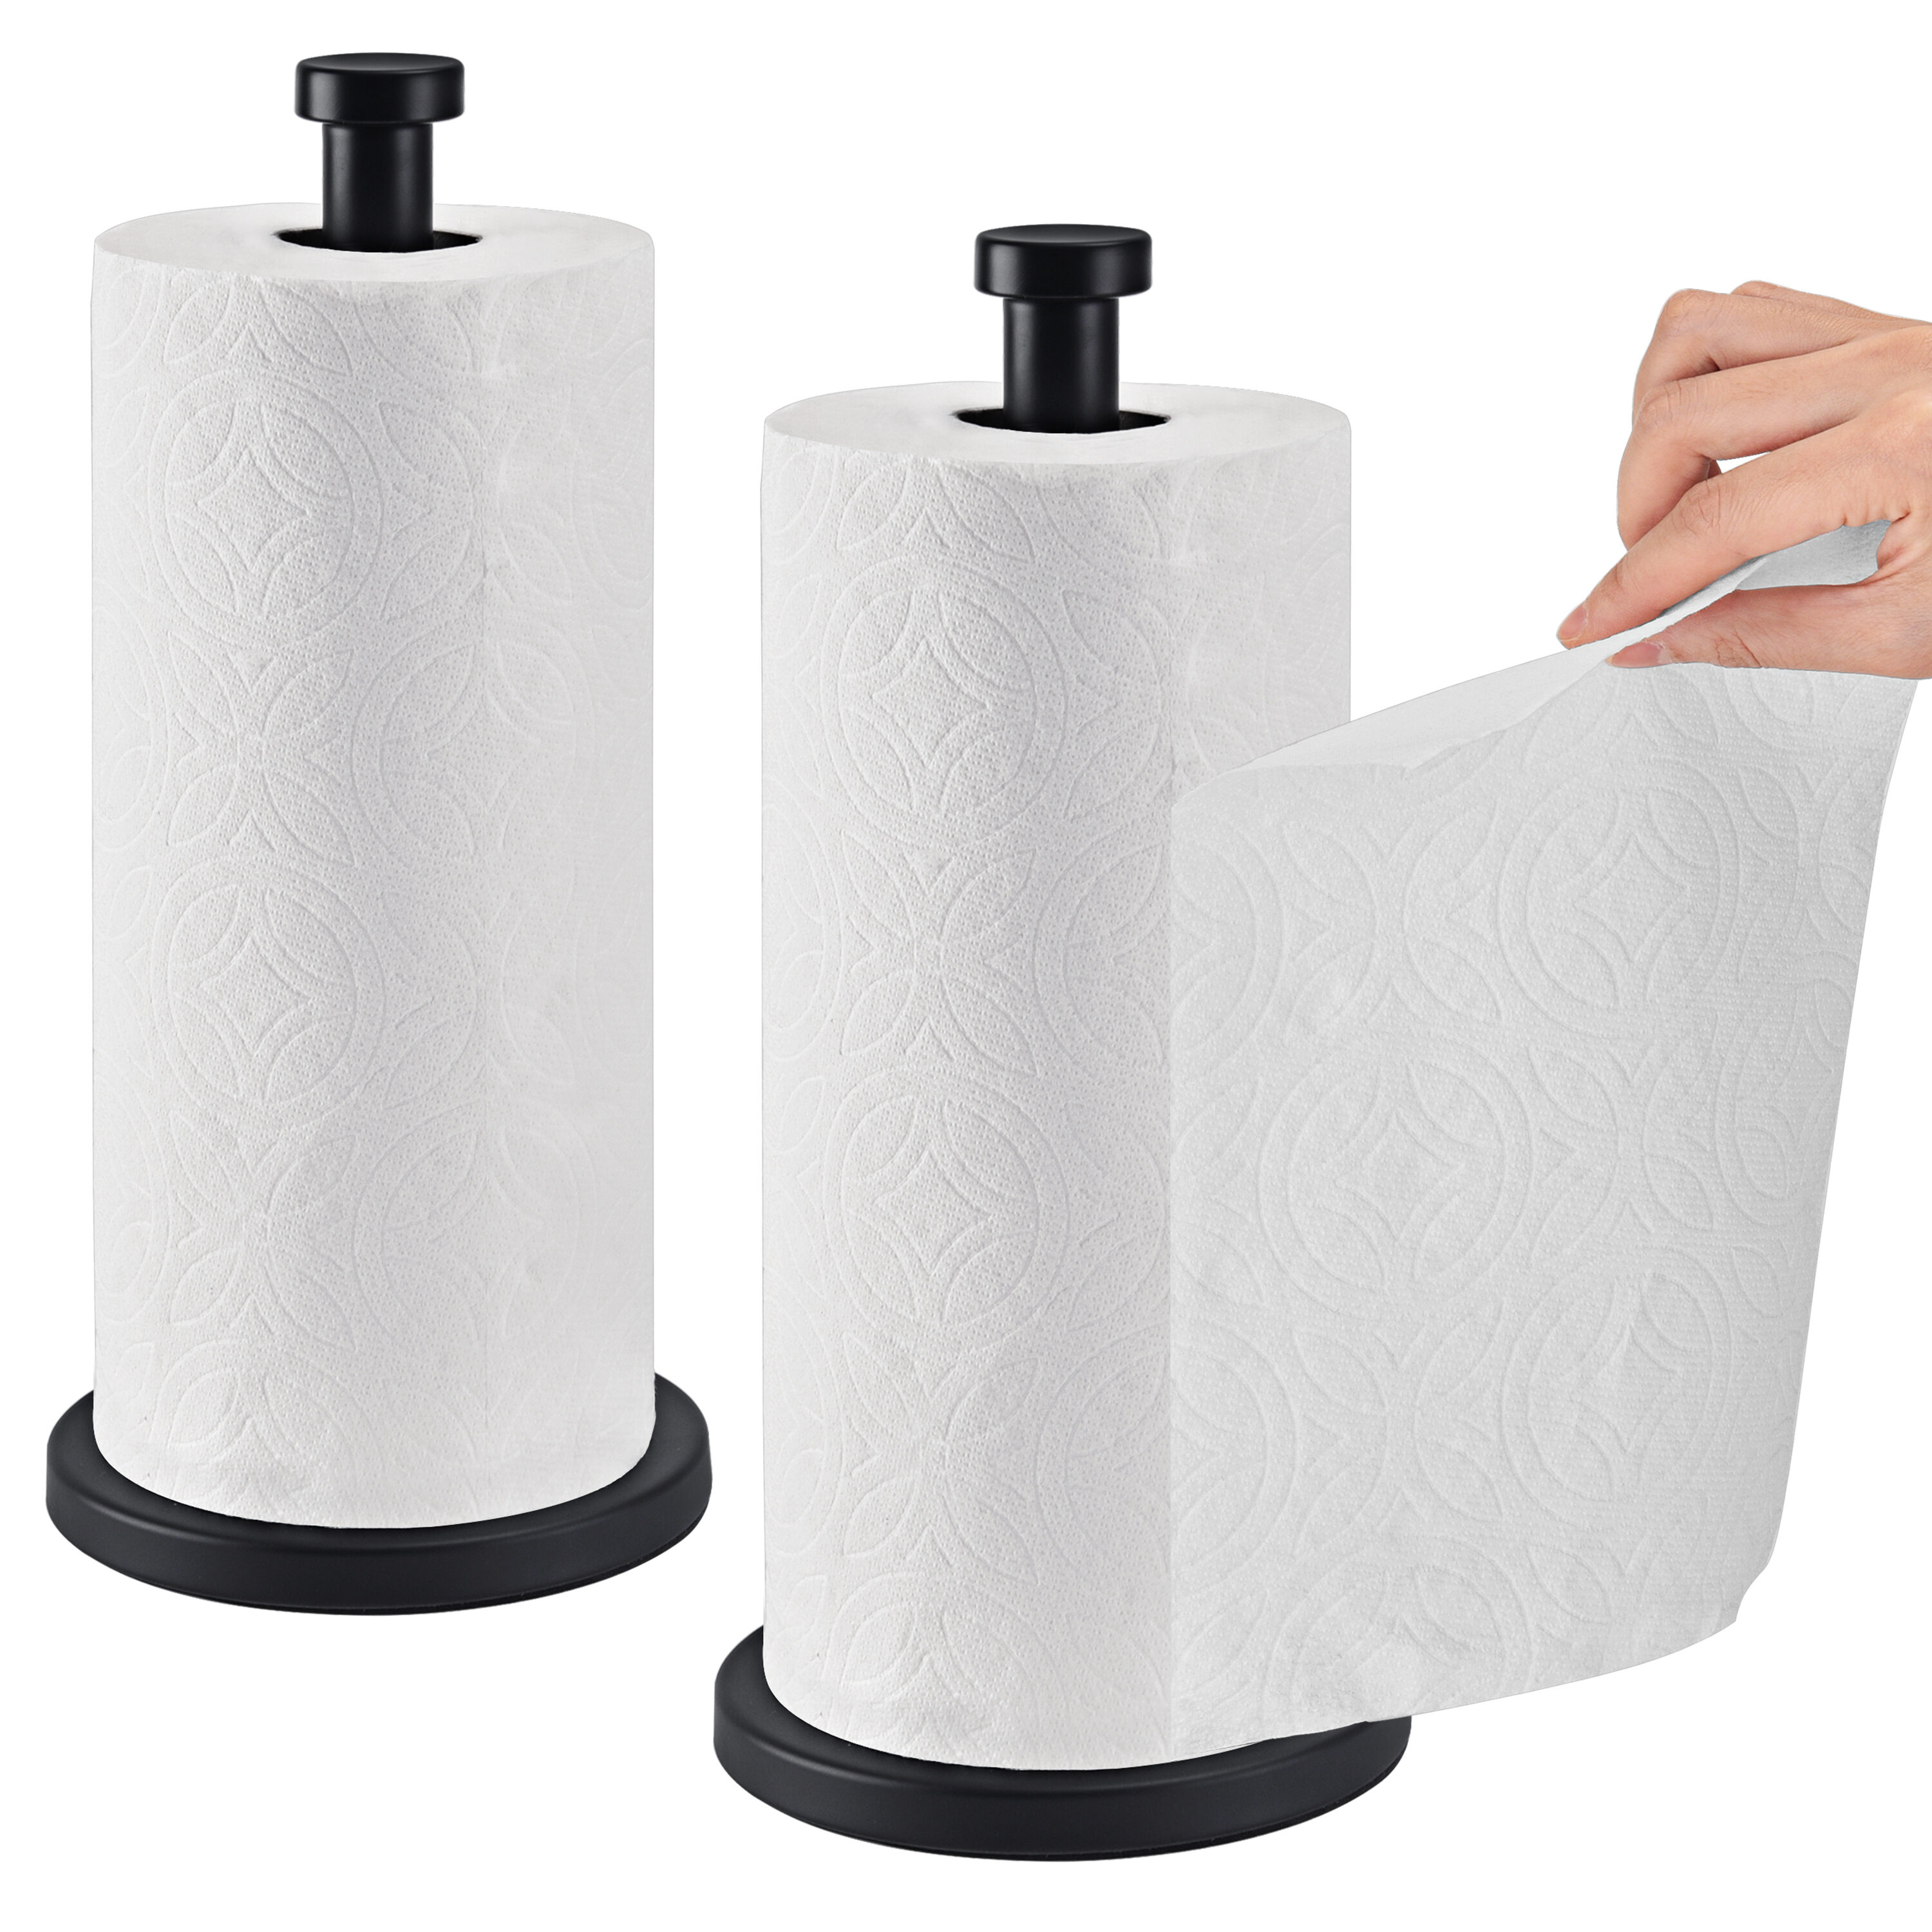  Vine Series Paper Towel Holder by Everyday Solutions - Stainless  Steel - Sleek Kitchen Roll Holder - Free Standing Vertical Paper Towel  Stand for Home and Kitchen